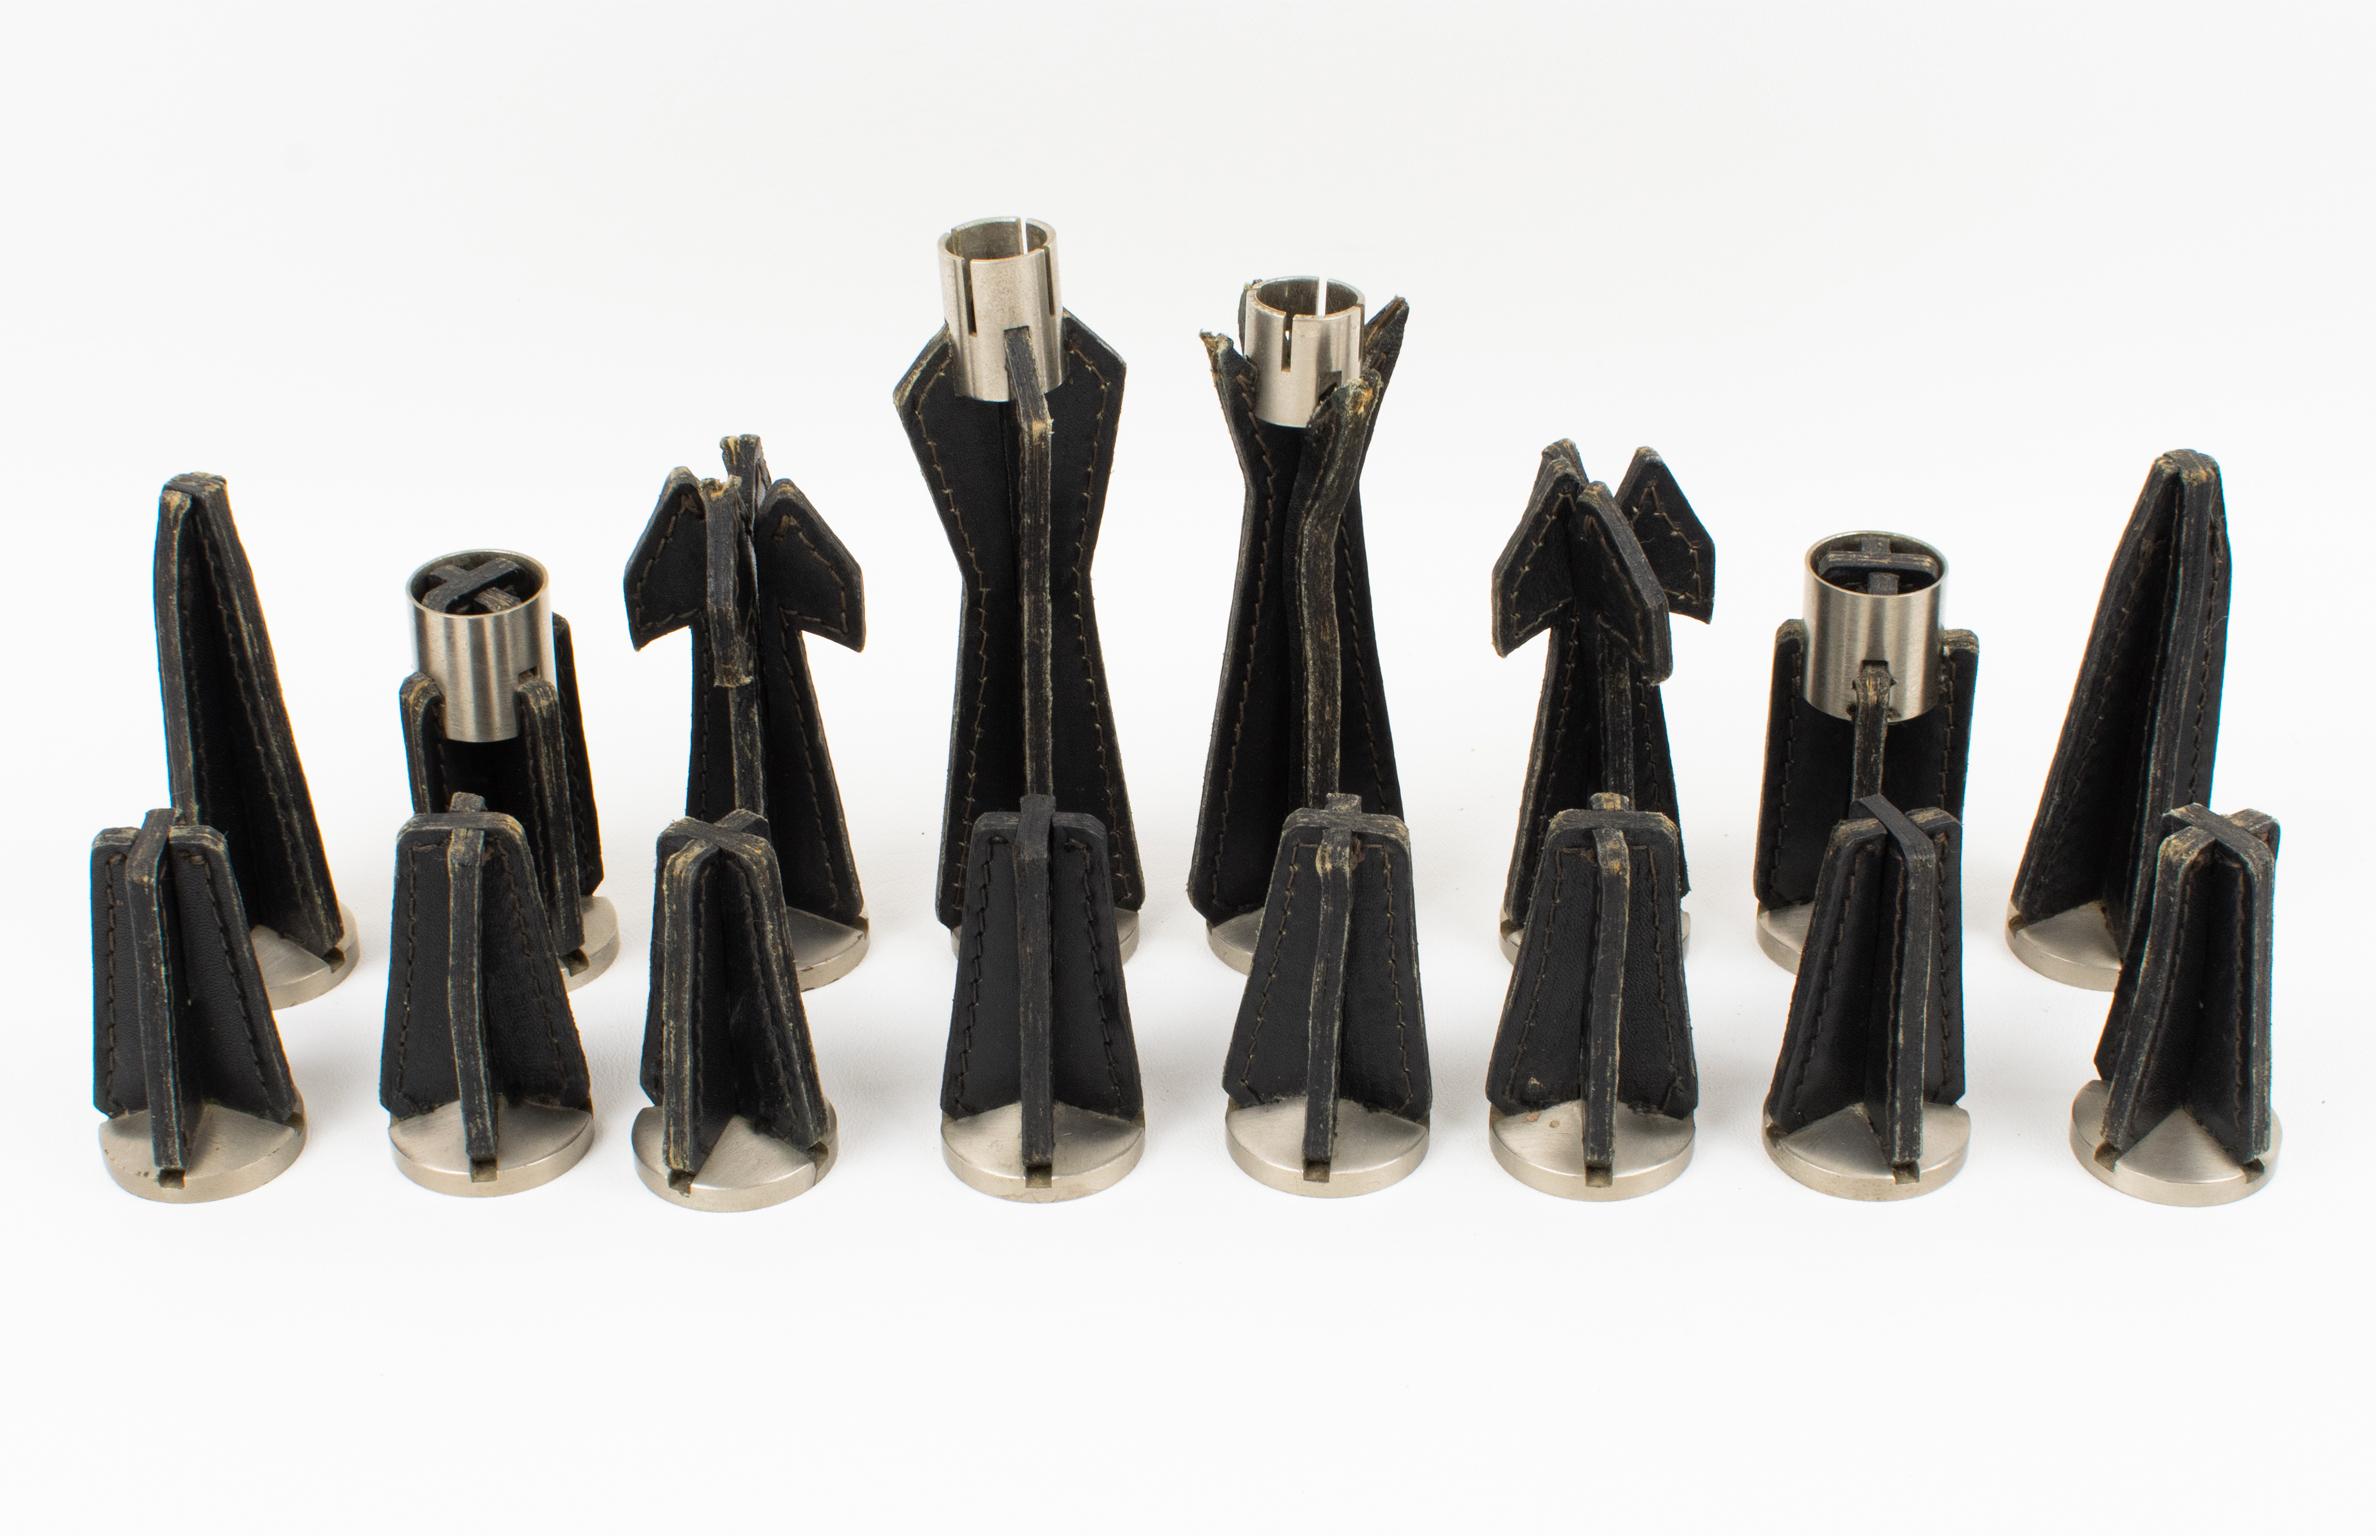 French Jacques Adnet Hand-Stitched Black and Cognac Leather Chess Board and Set For Sale